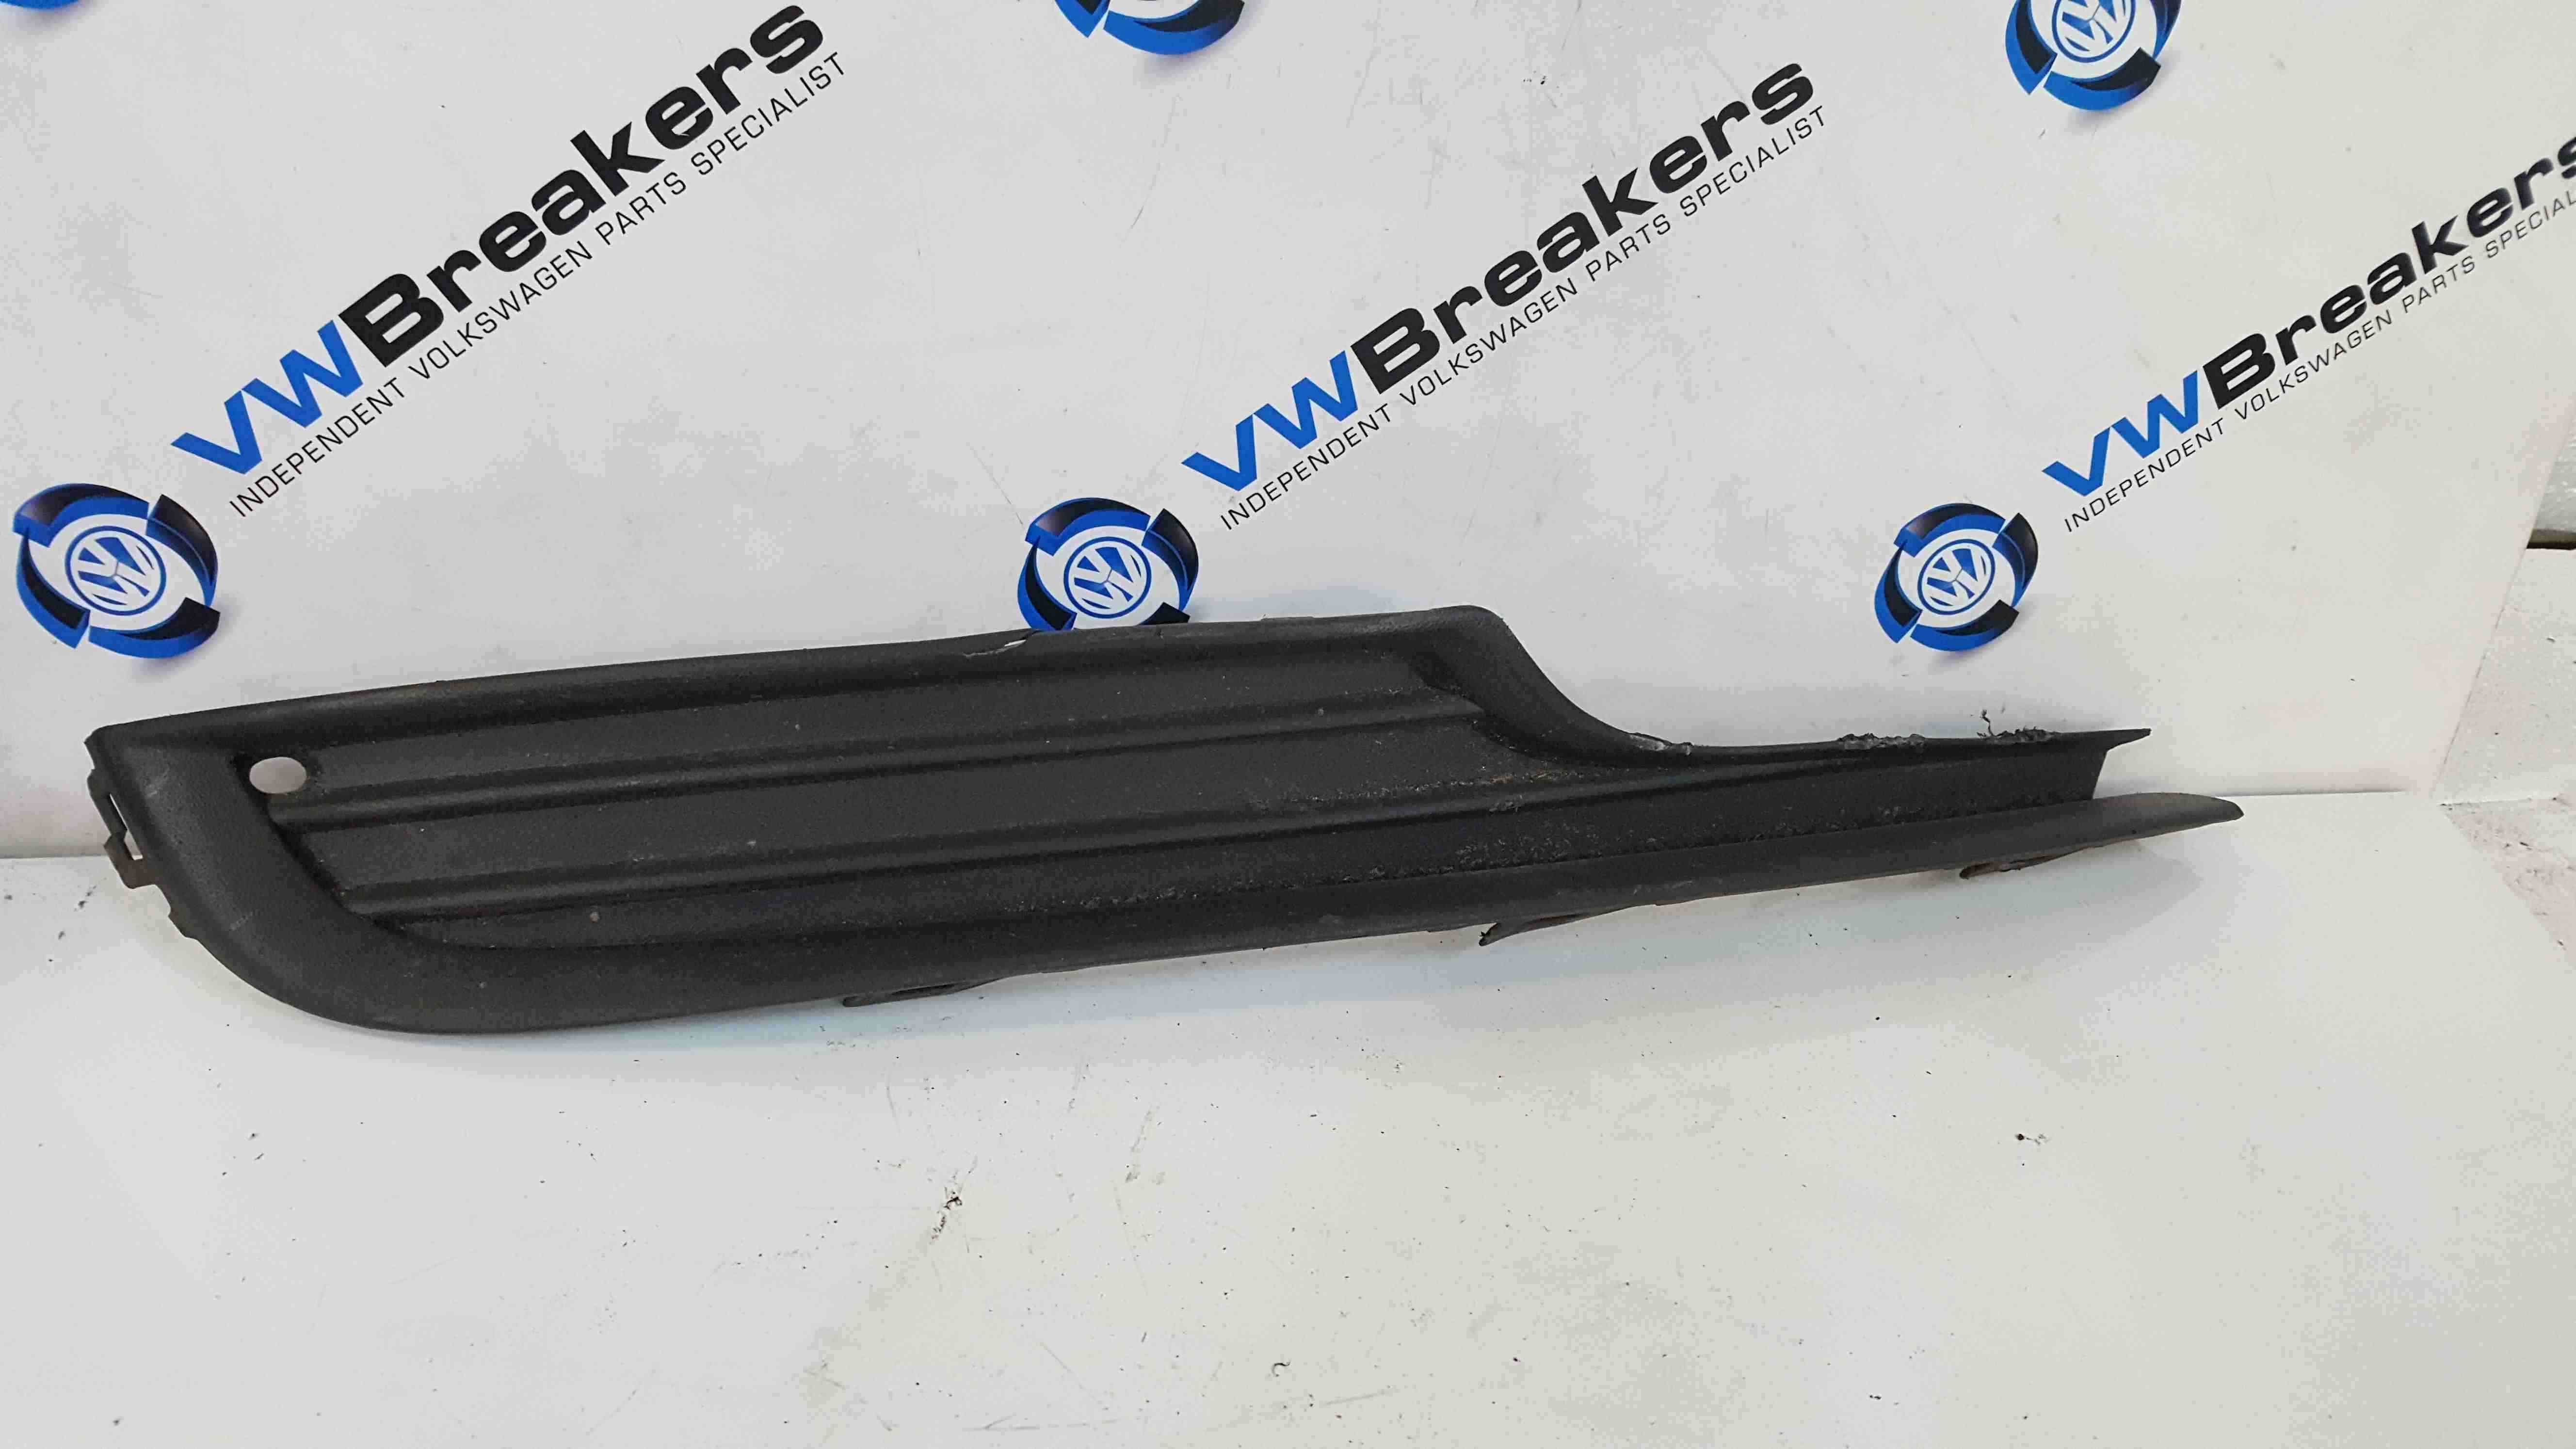 Volkswagen Golf MK7 2012-2017 Drivers OSF Front Lower Bumper Grill Insert